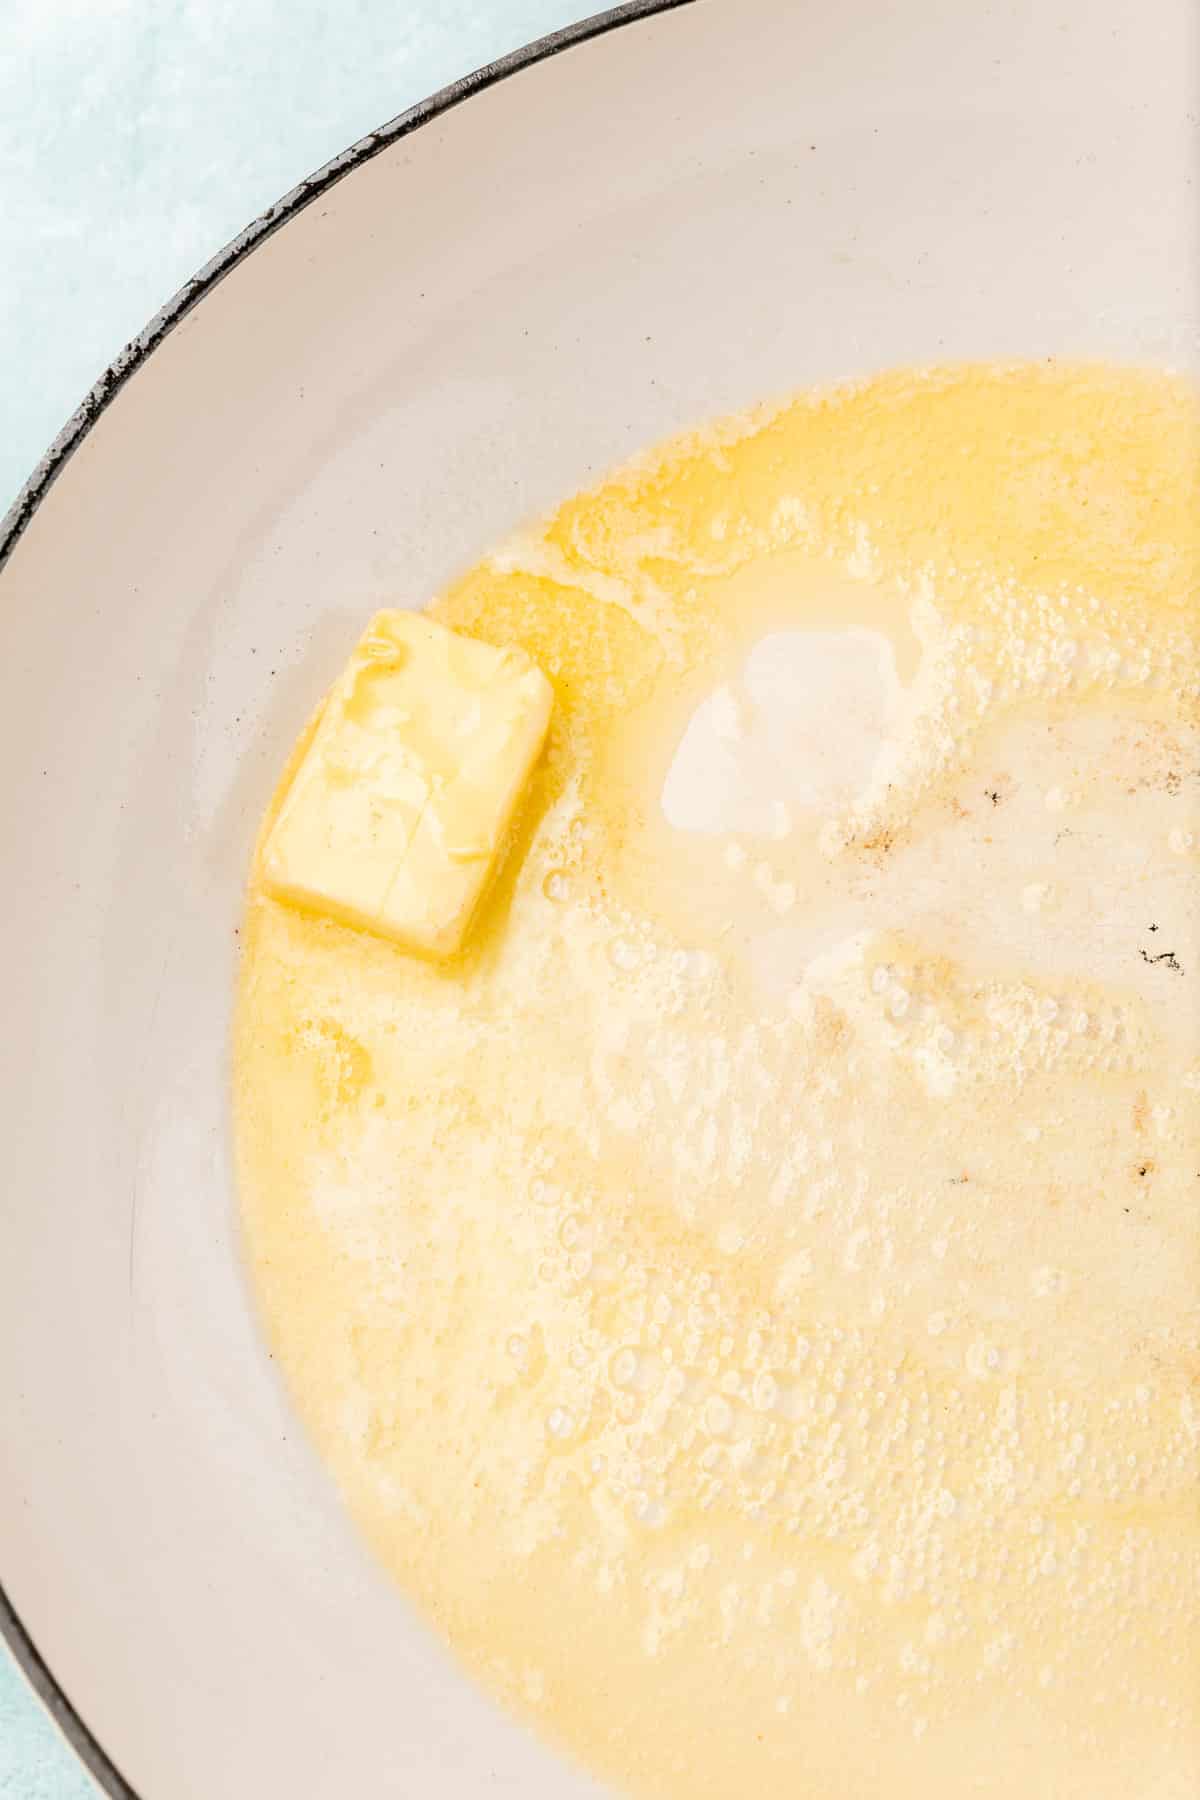 A knob of butter melting in a large white skillet.